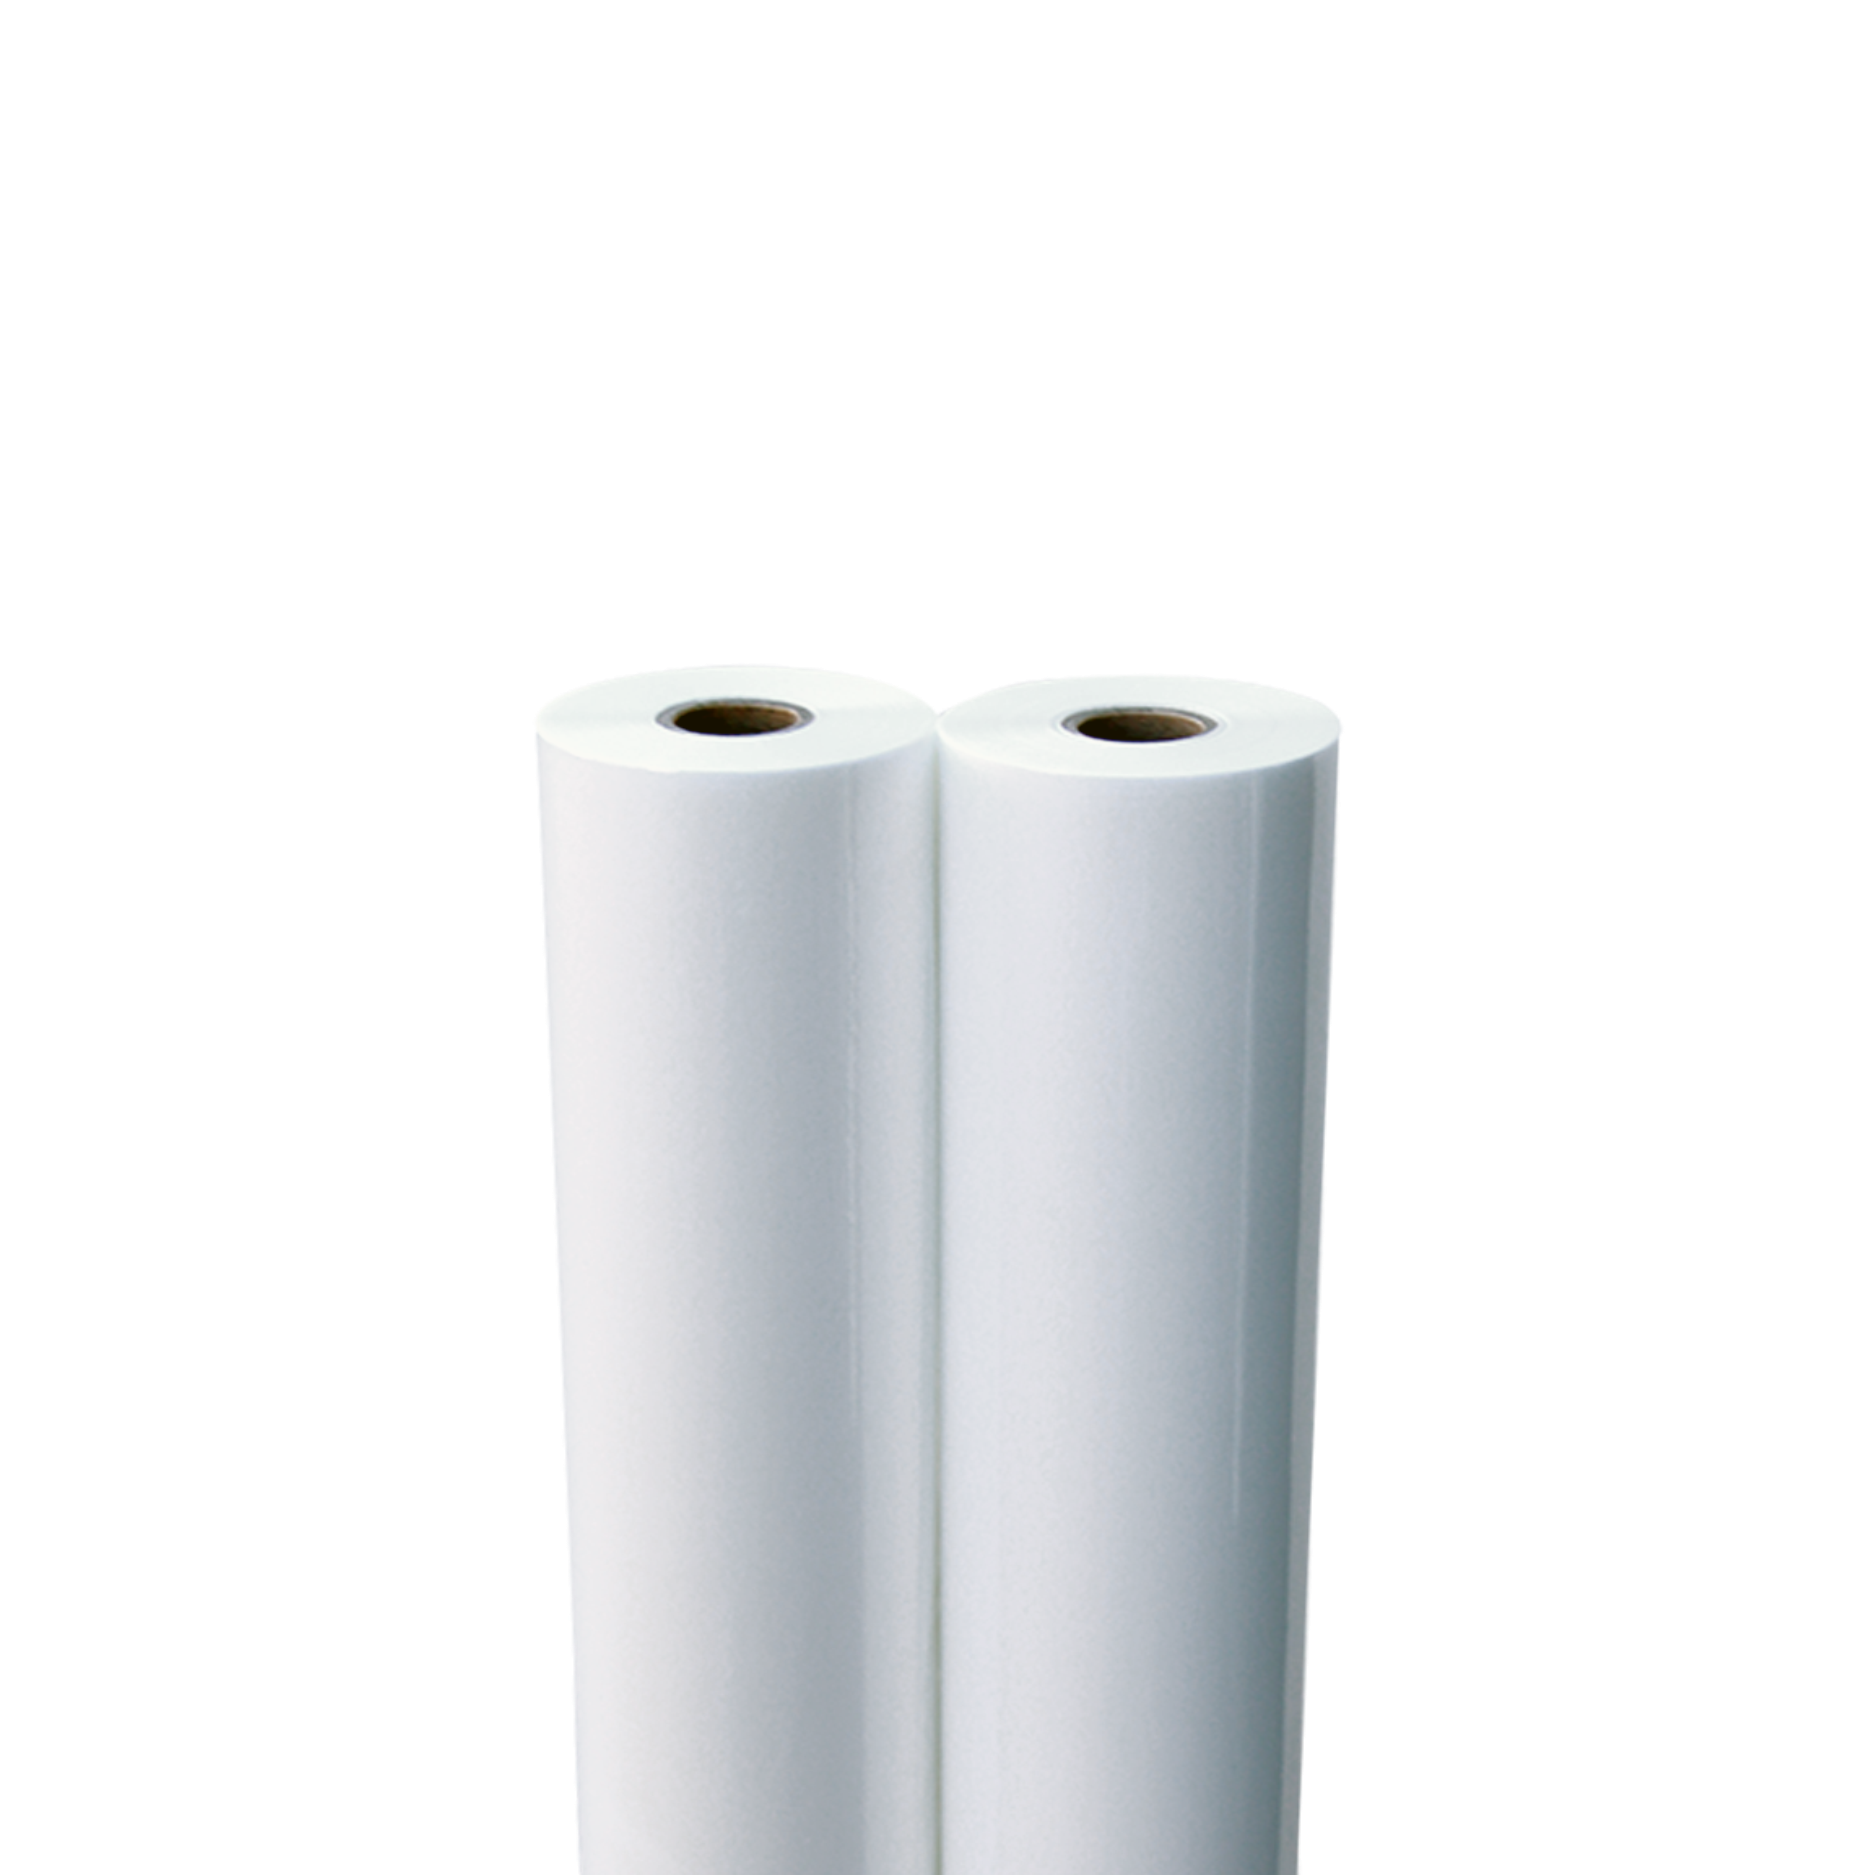 D&K 25 Inch Replacement Laminating Film